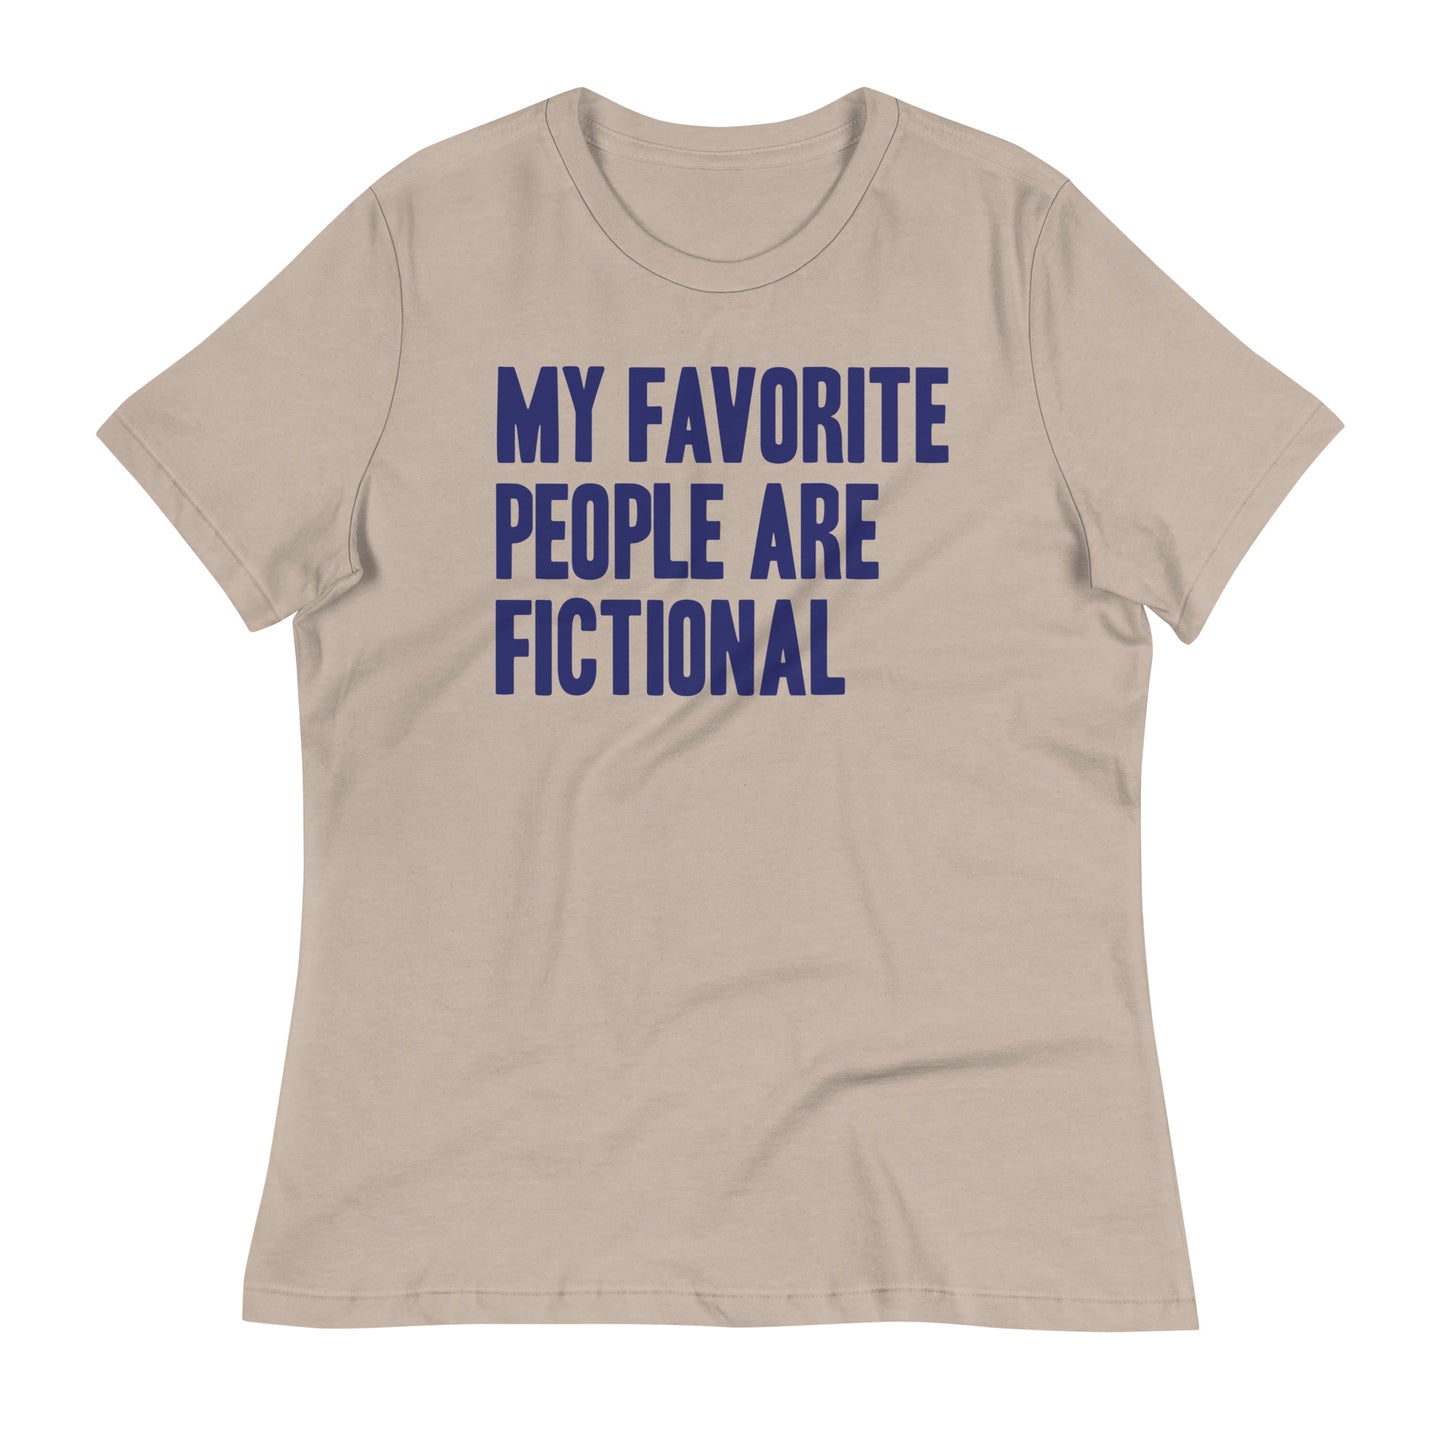 My Favorite People Are Fictional Women's Signature Tee